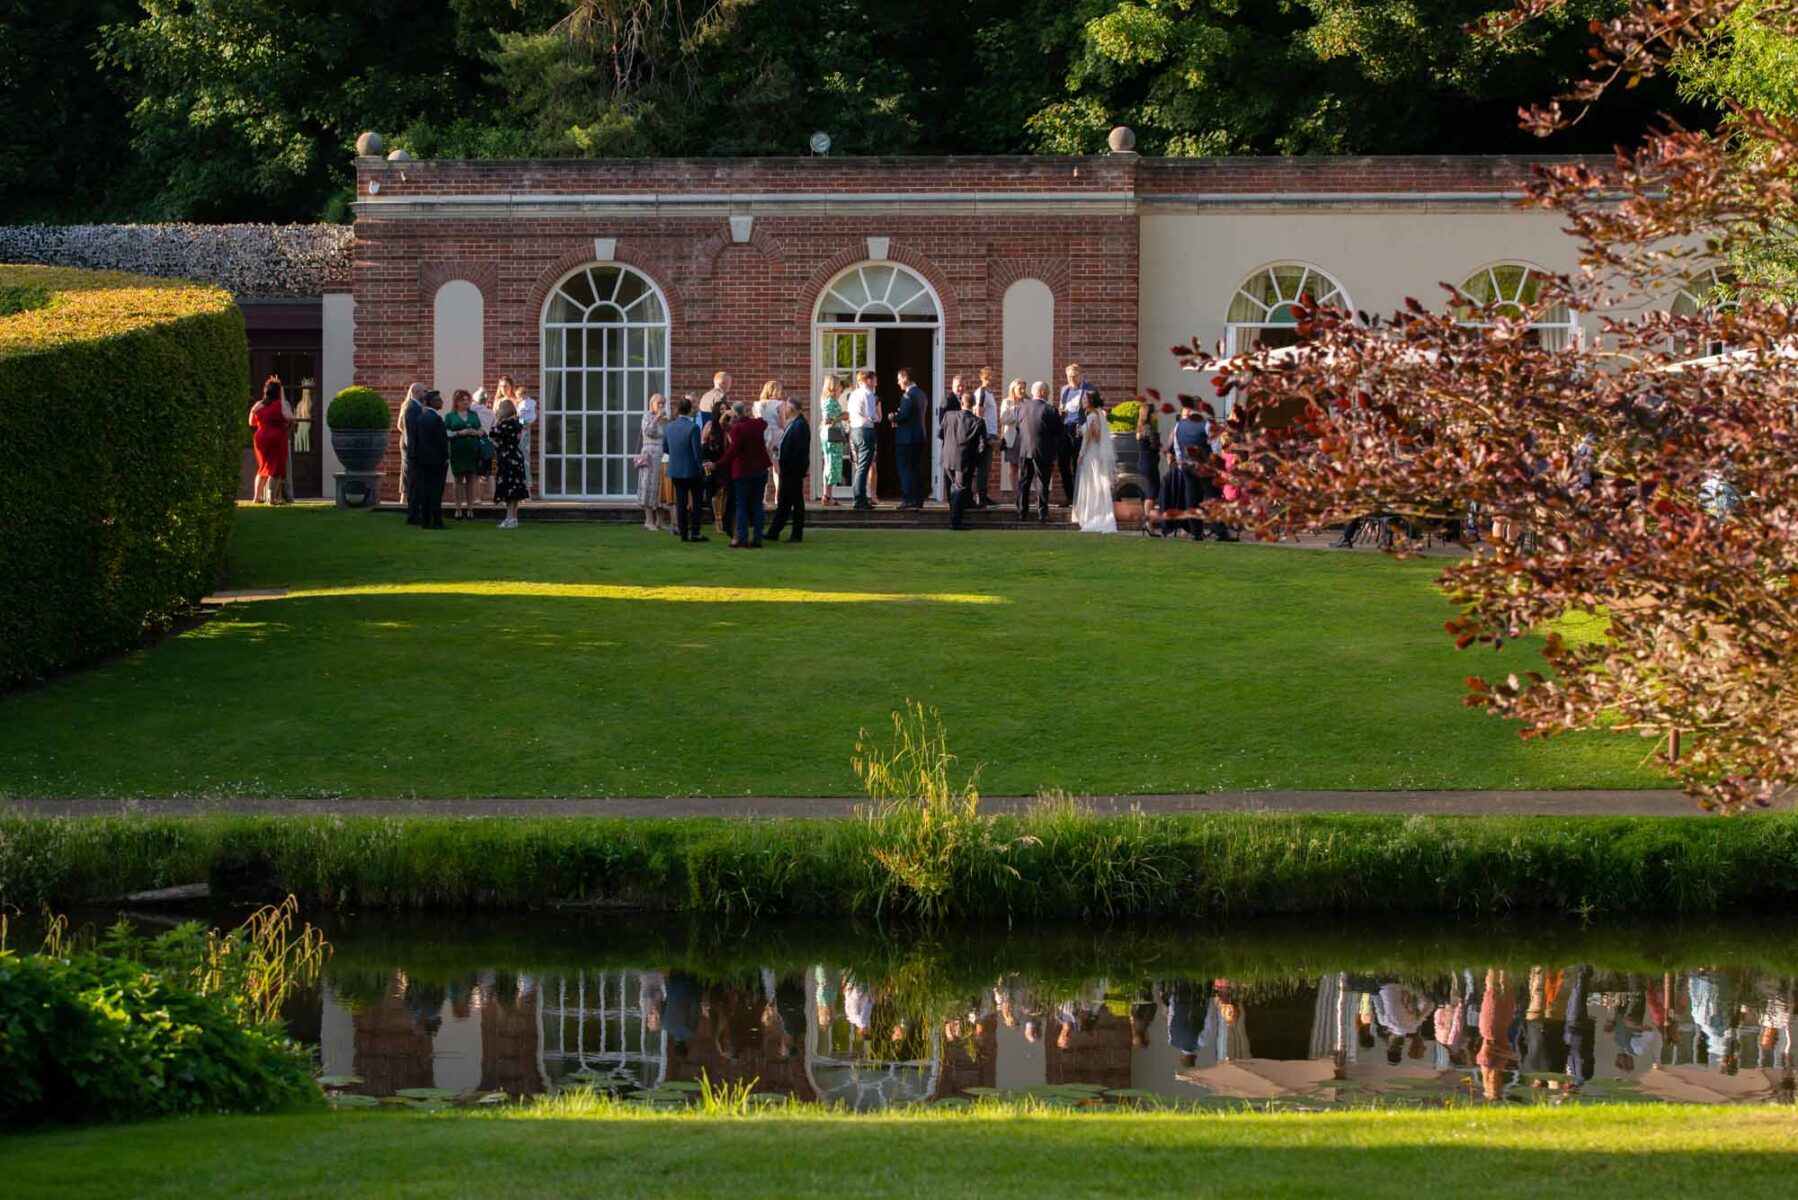 Wedding guests outdoors at the Orangery Maidstone